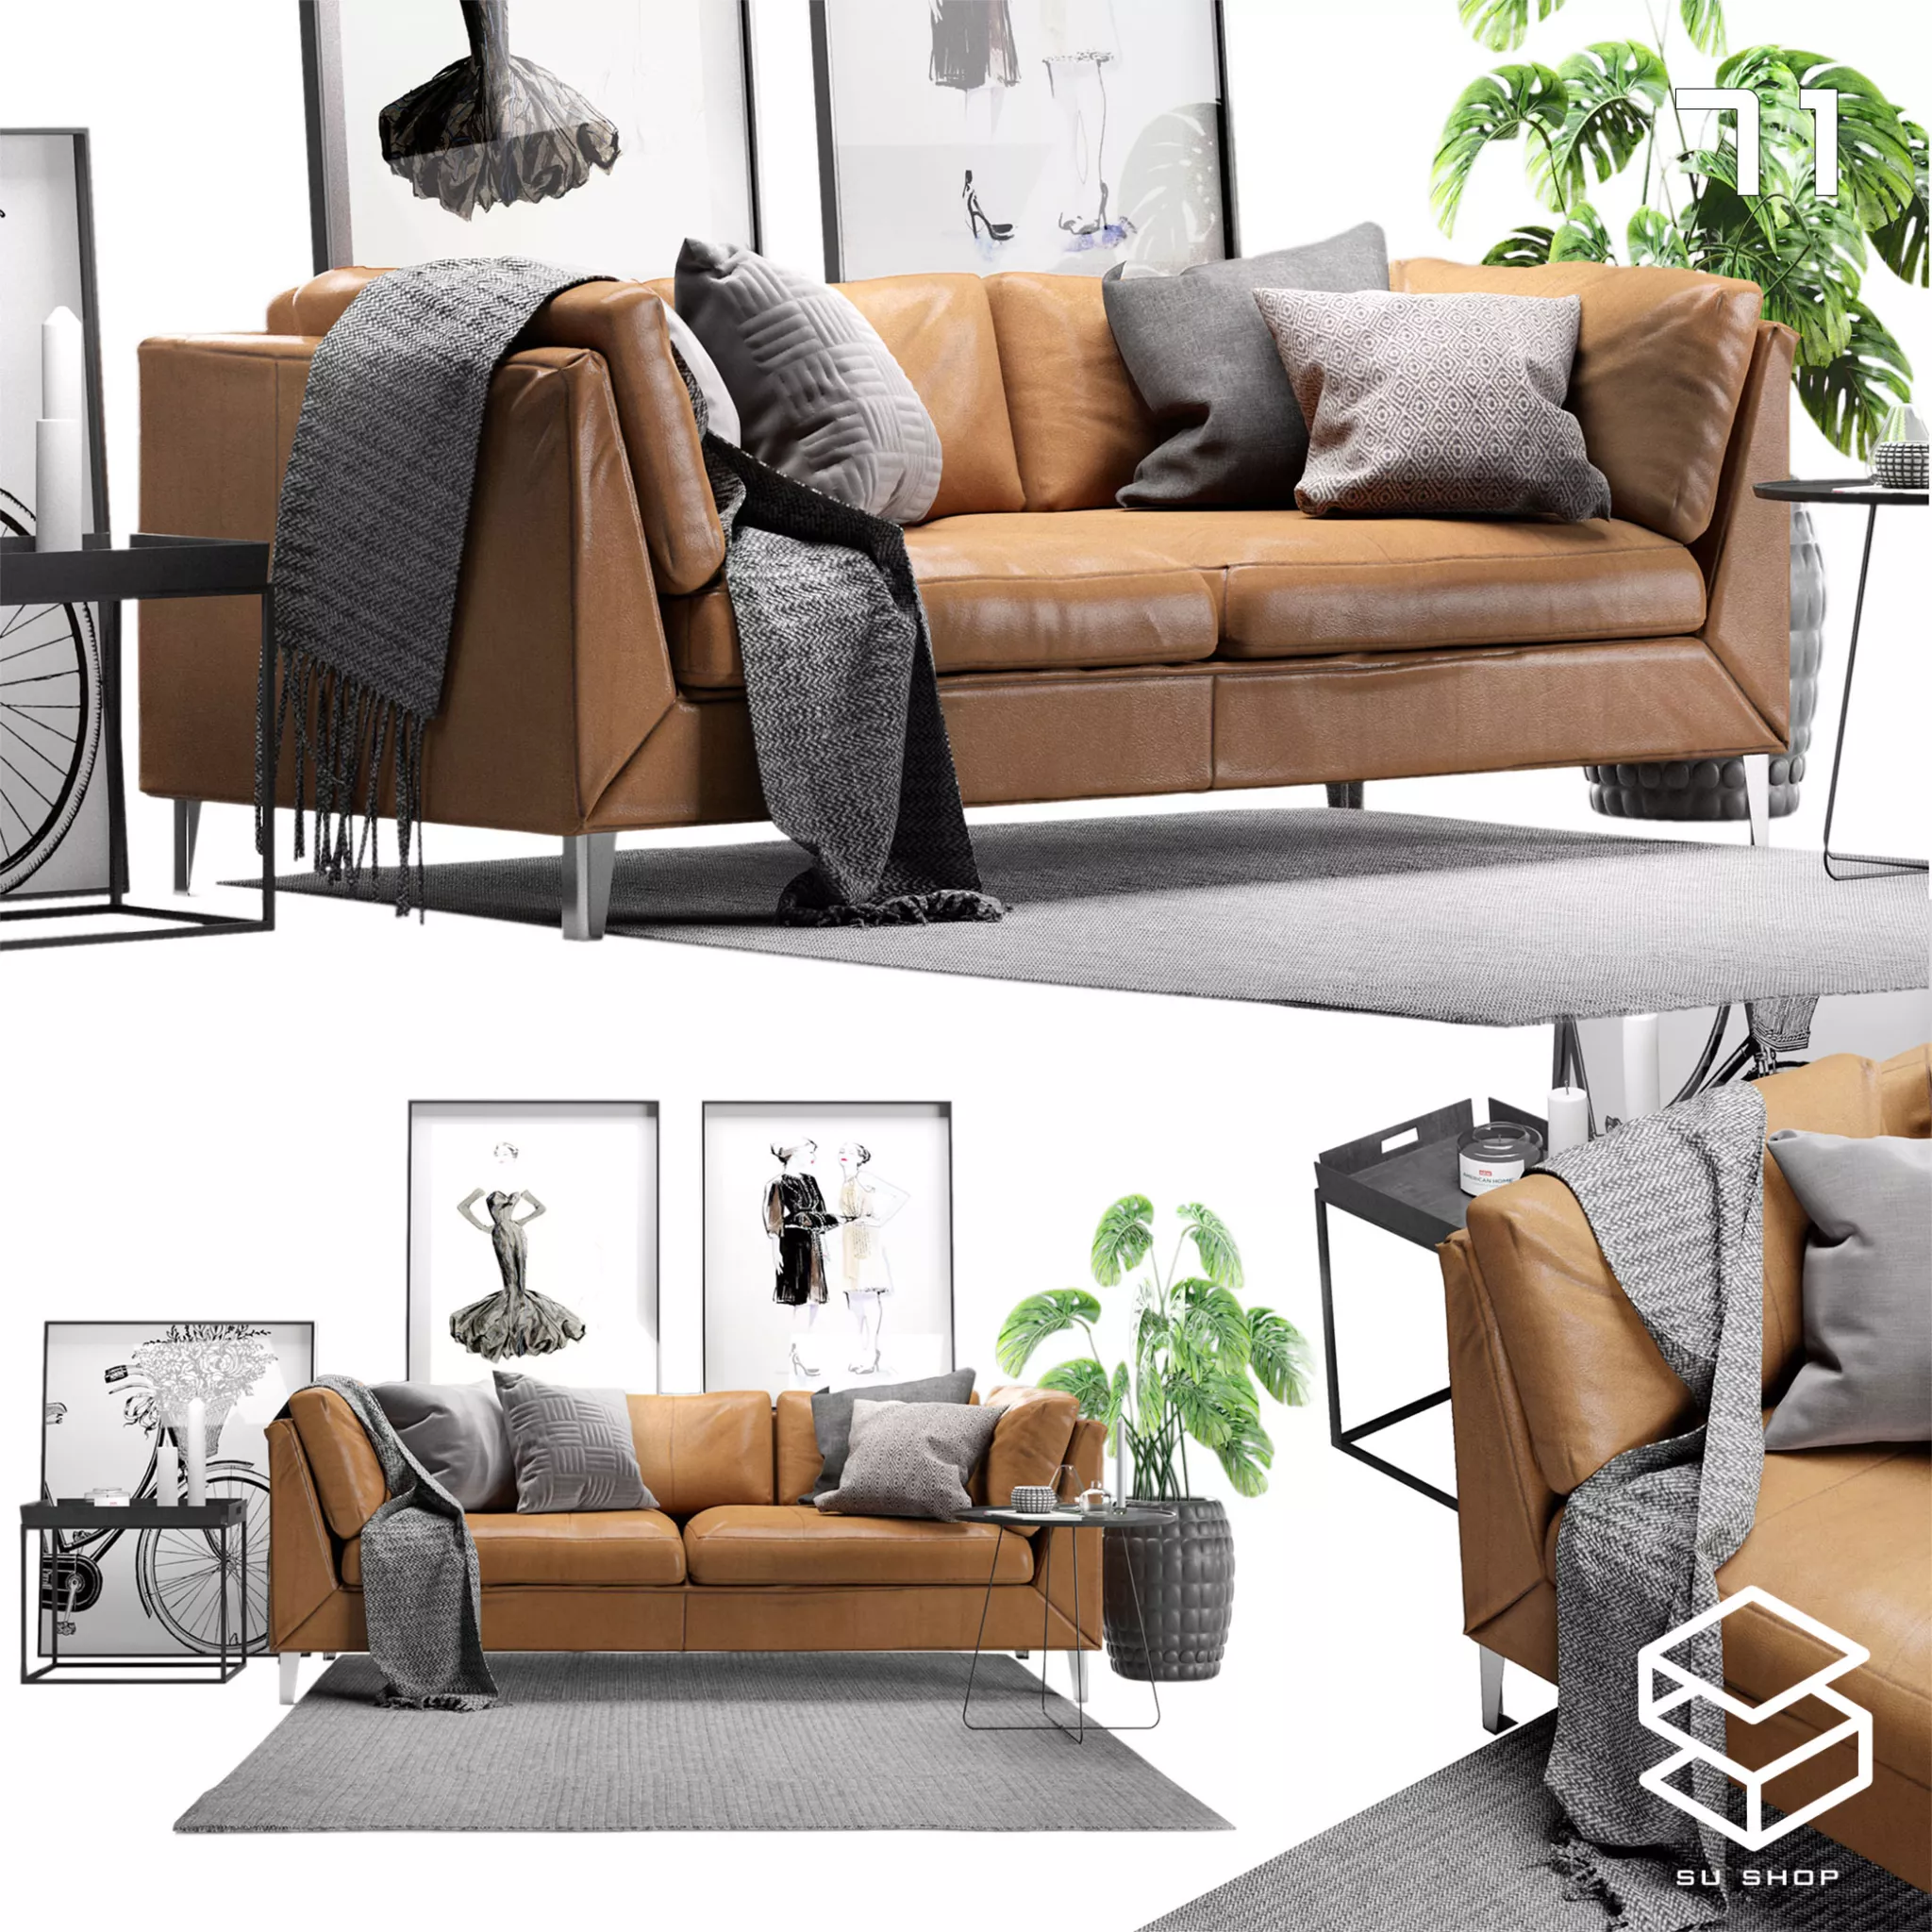 MODERN SOFA - SKETCHUP 3D MODEL - VRAY OR ENSCAPE - ID13698